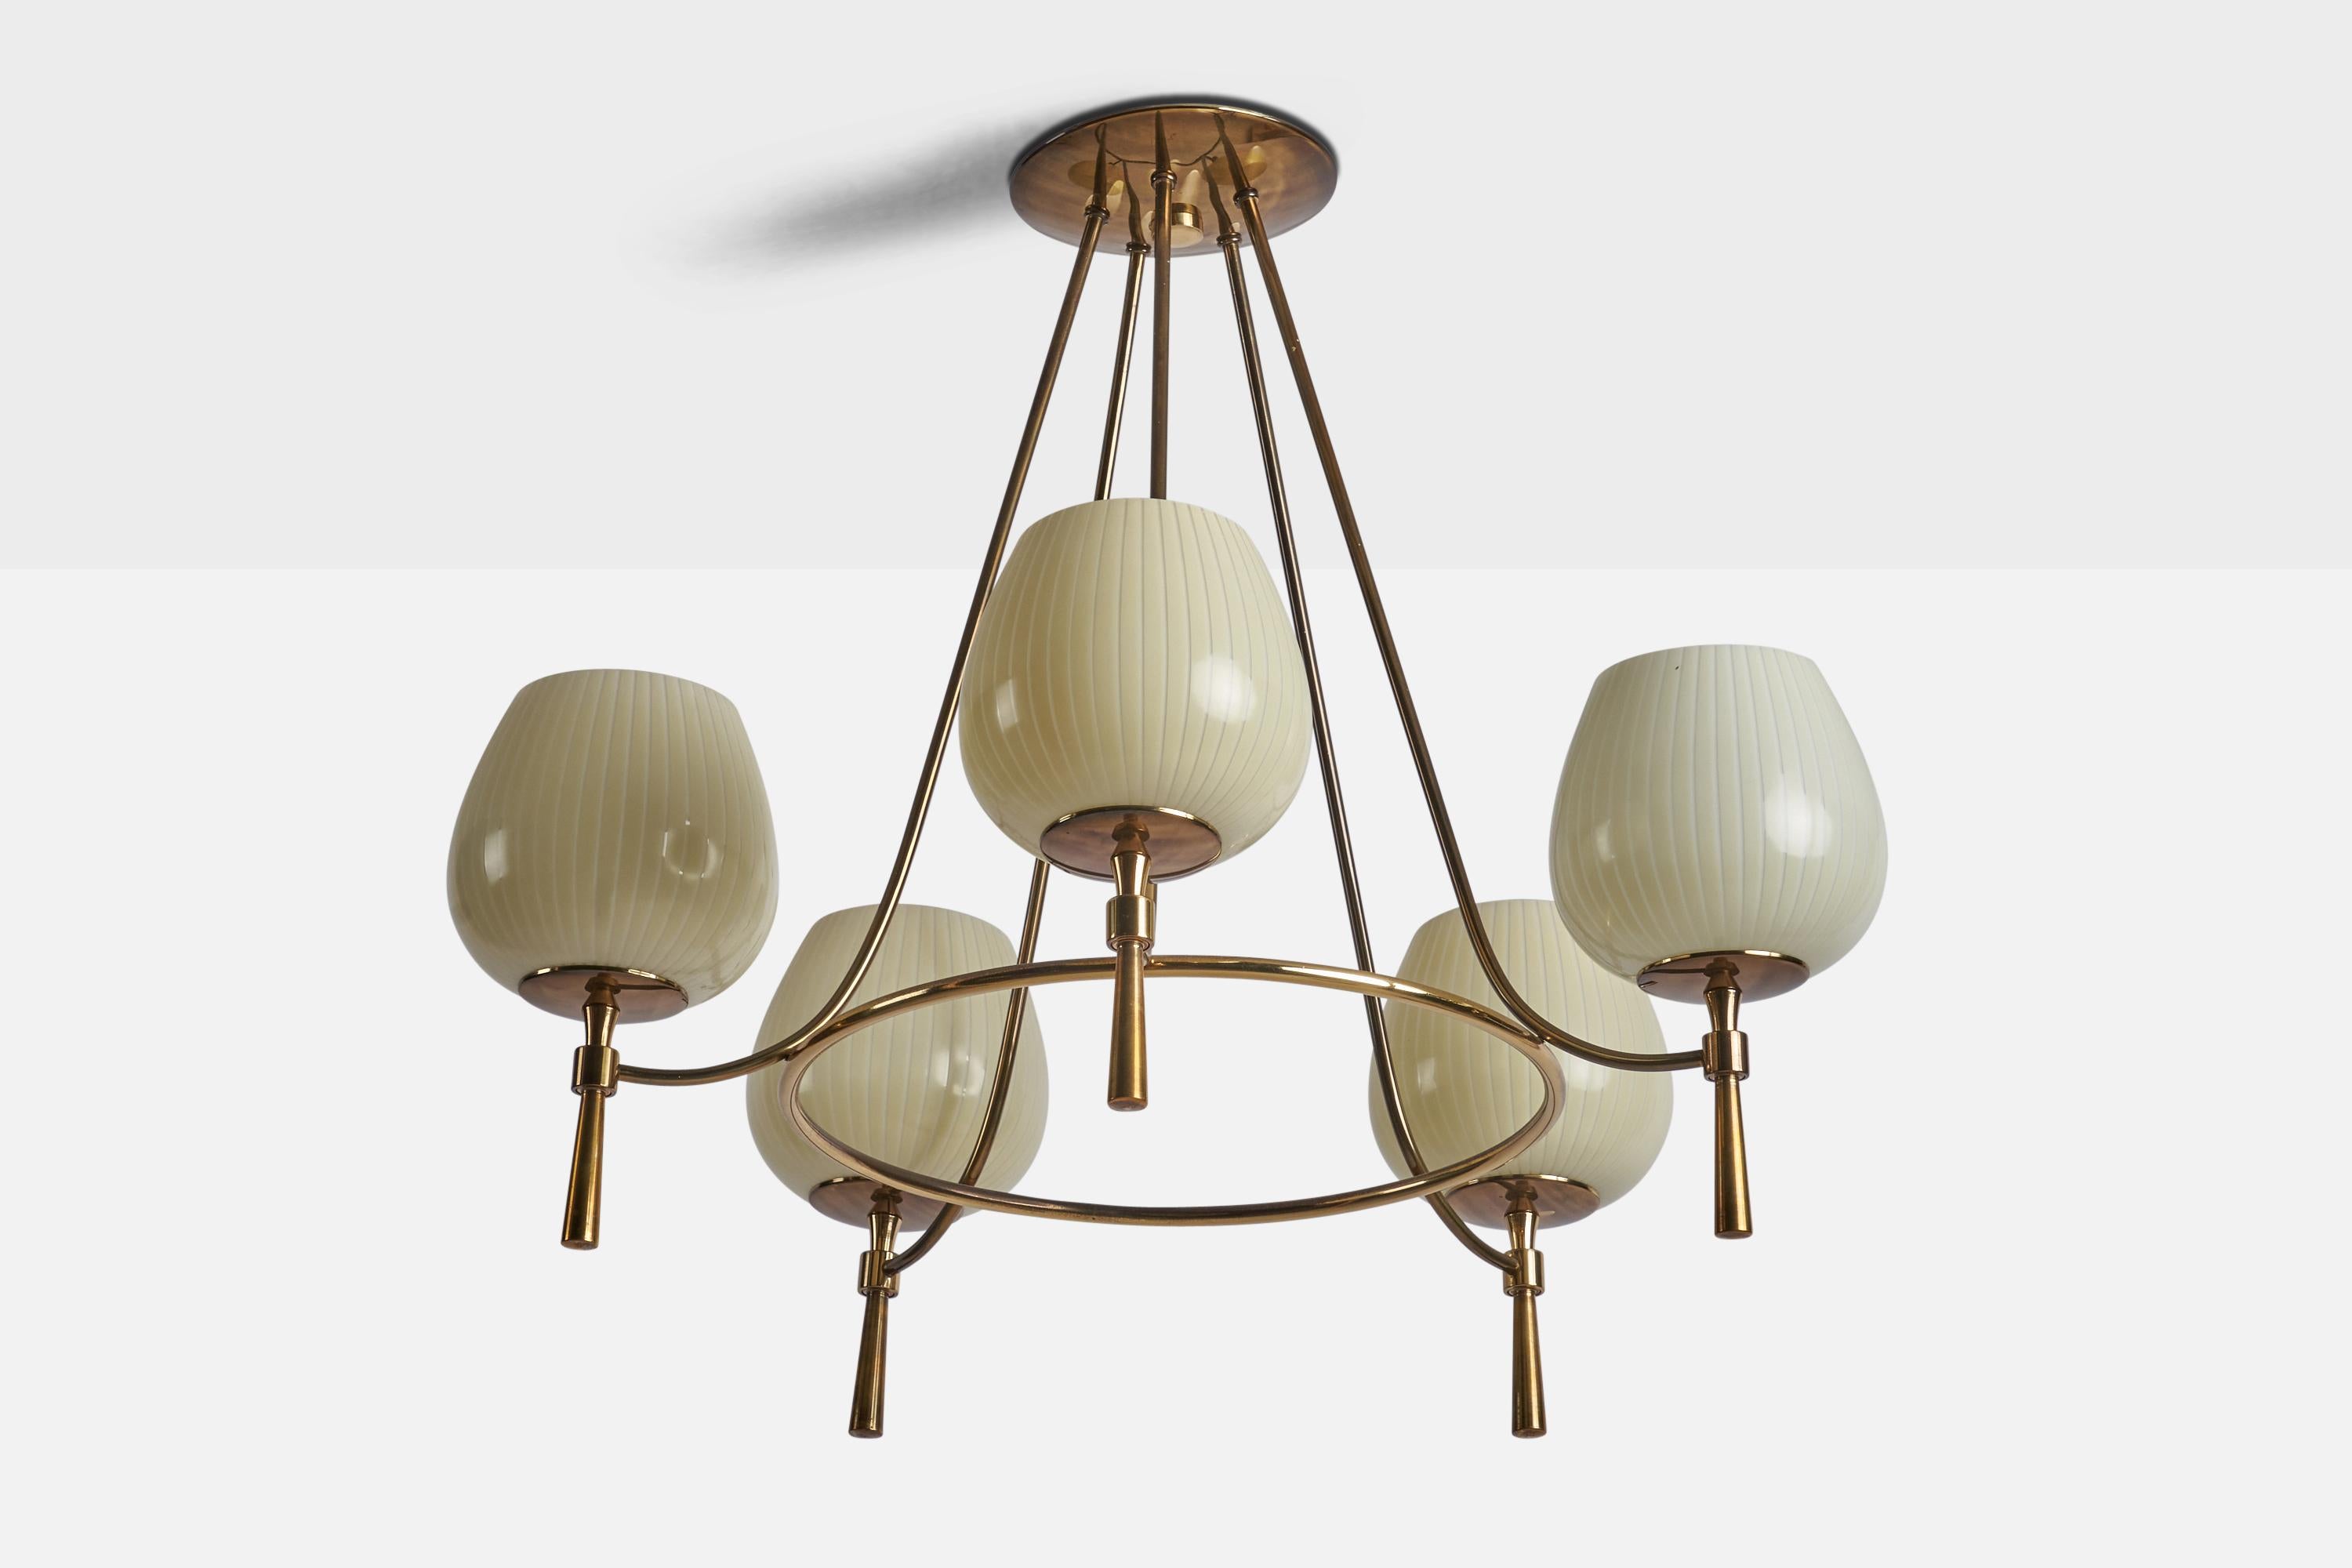 A five-armed brass and glass chandelier designed and produced by Lightolier, USA, 1960s.

Overall Dimensions (inches): 22.25” H x 26” Diameter
Back Plate Dimensions (inches): 6.25” Diameter
Bulb Specifications: E-26 Bulb
Number of Sockets: 5
All